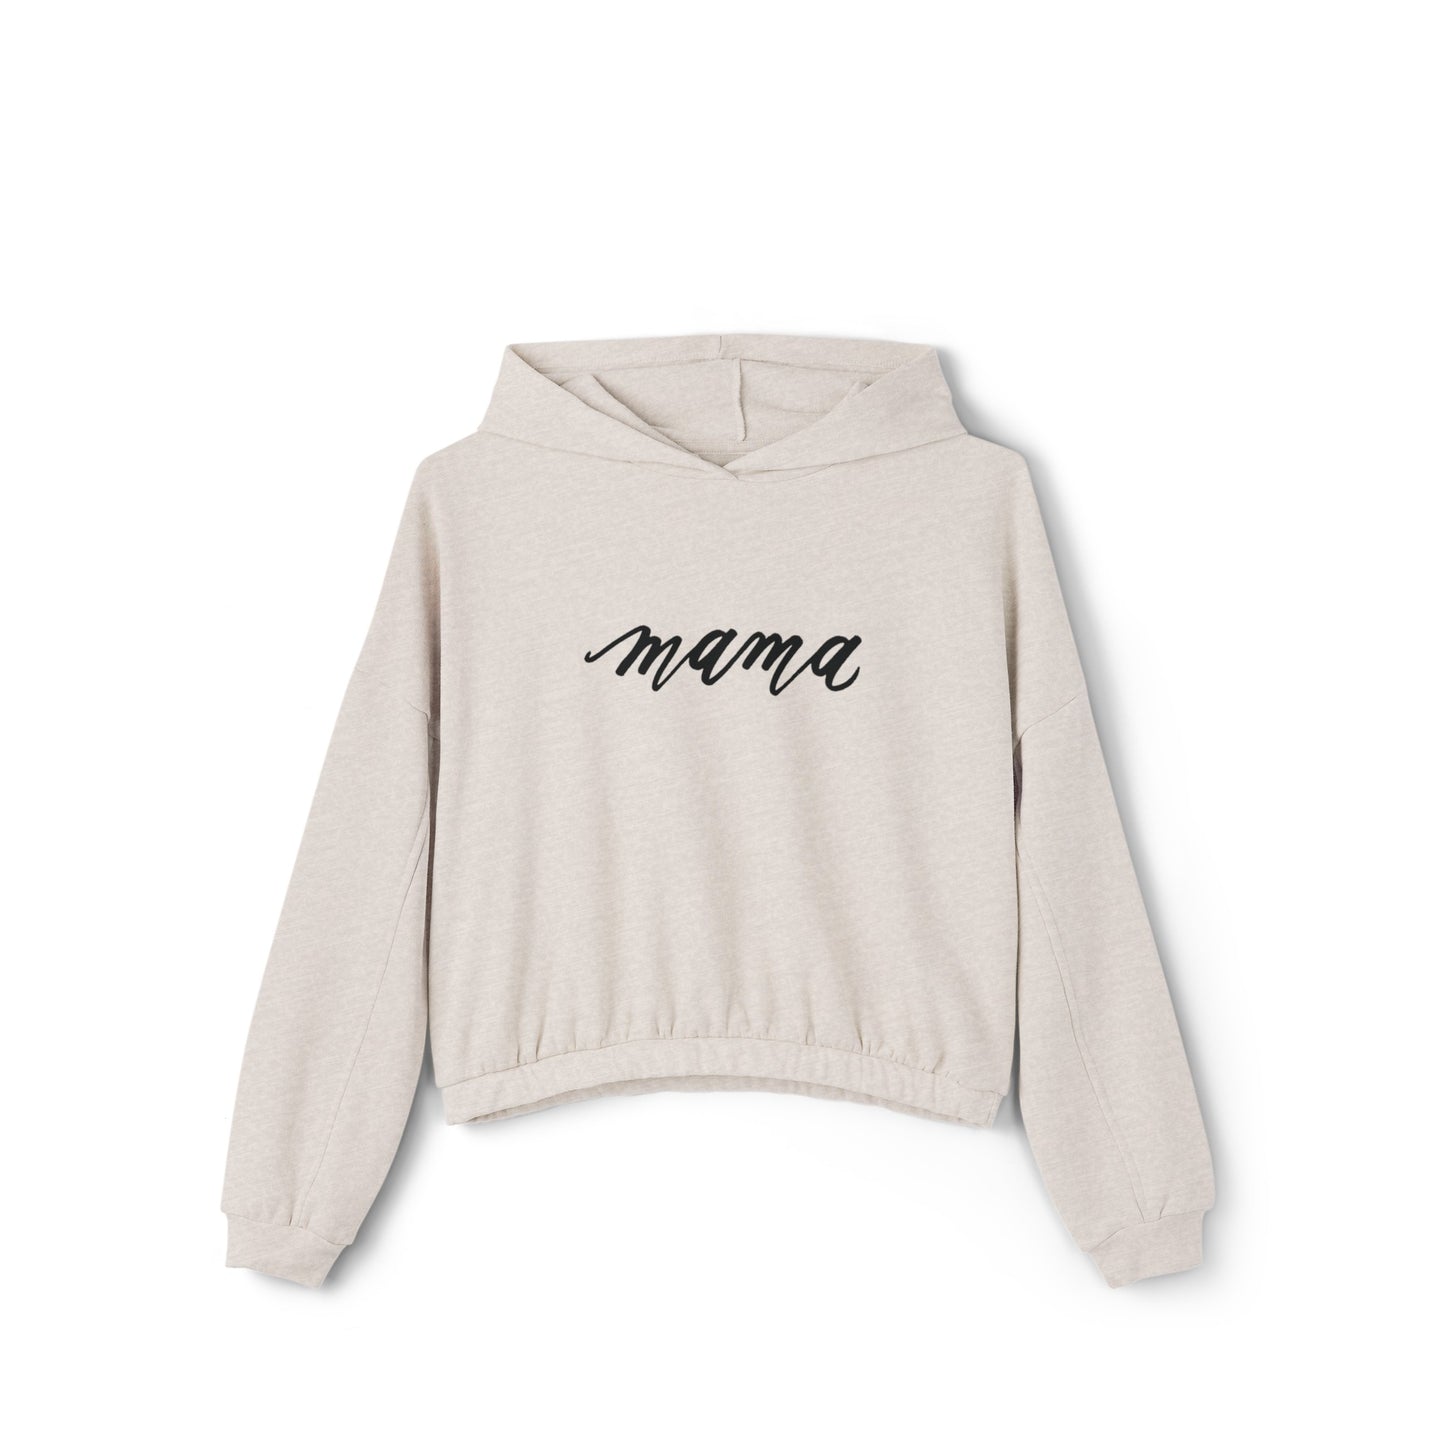 Script "Mama" Calligraphy Printed Everyday Women's Cinched Bottom Hoodie